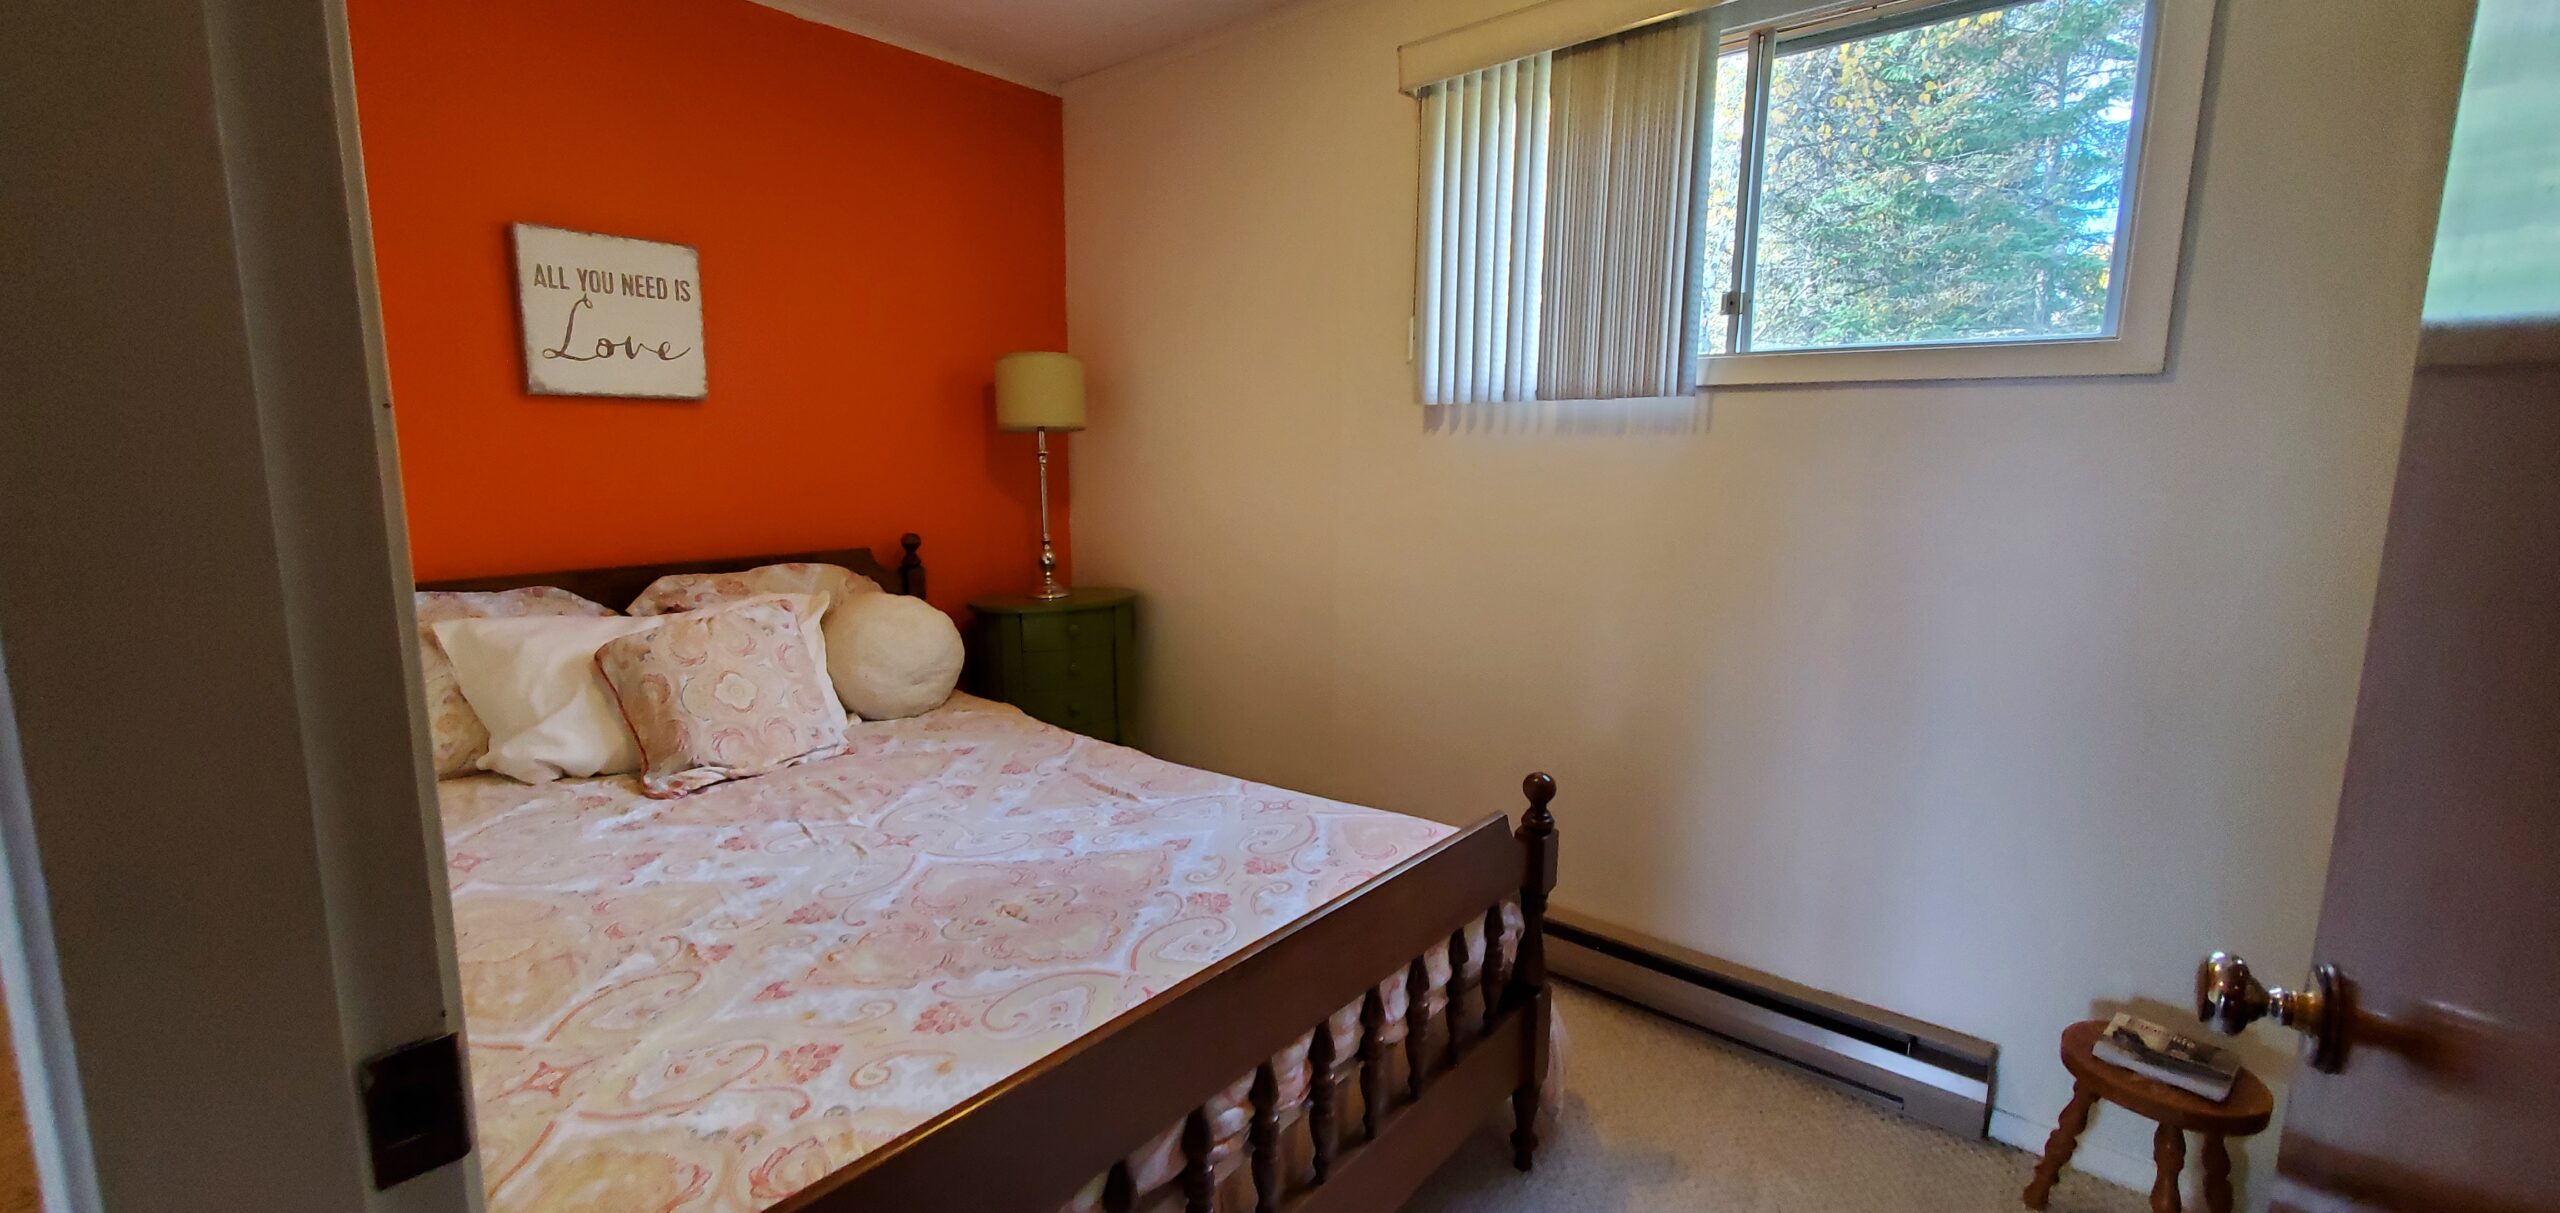 A small bedroom with a big bed, a window, and an orange accent wall.